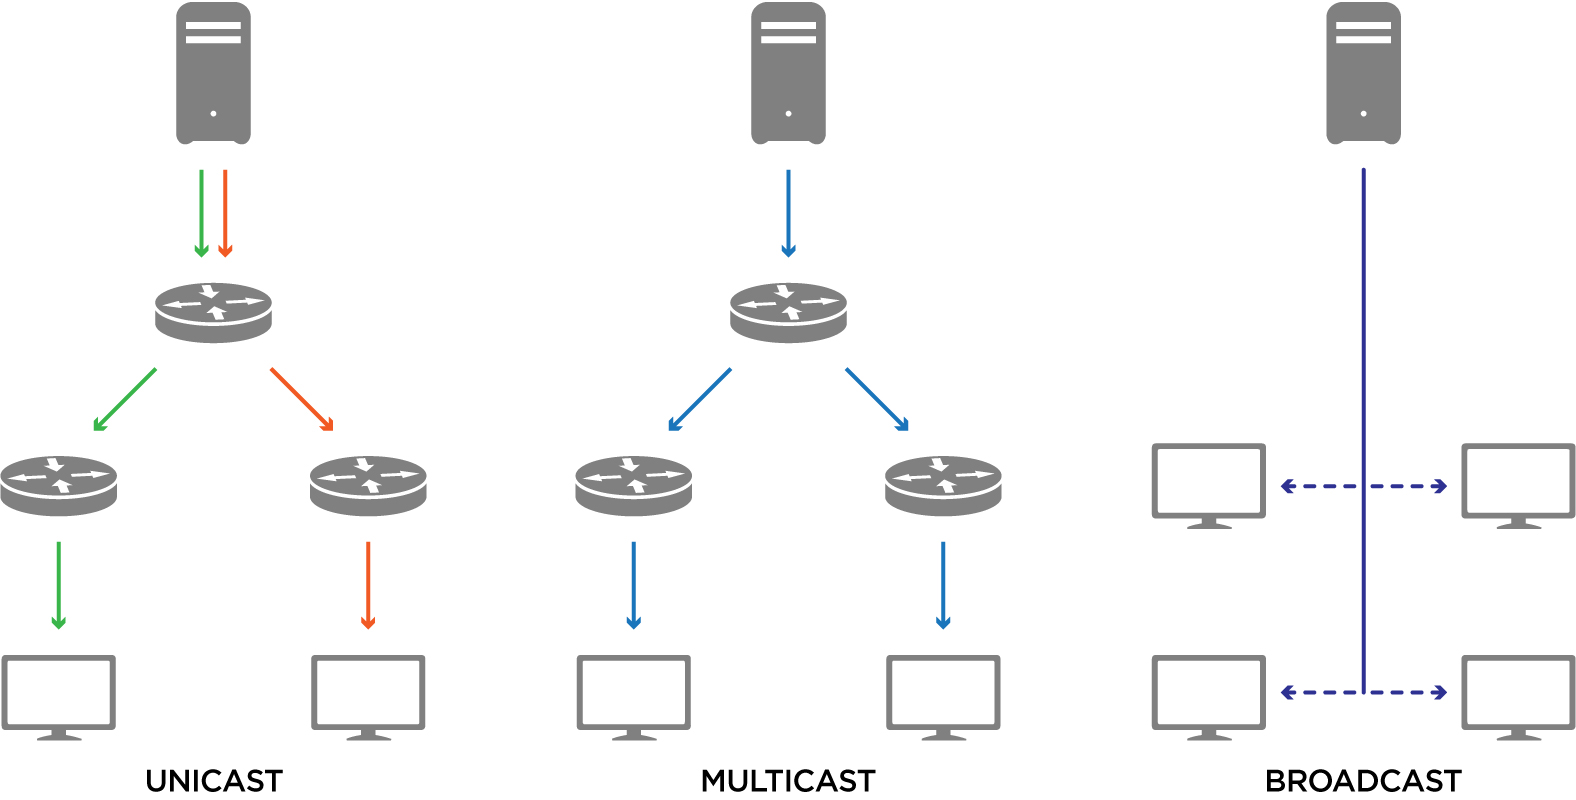 Unicast vs Multicast vs Broadcast: What’s the Difference? 